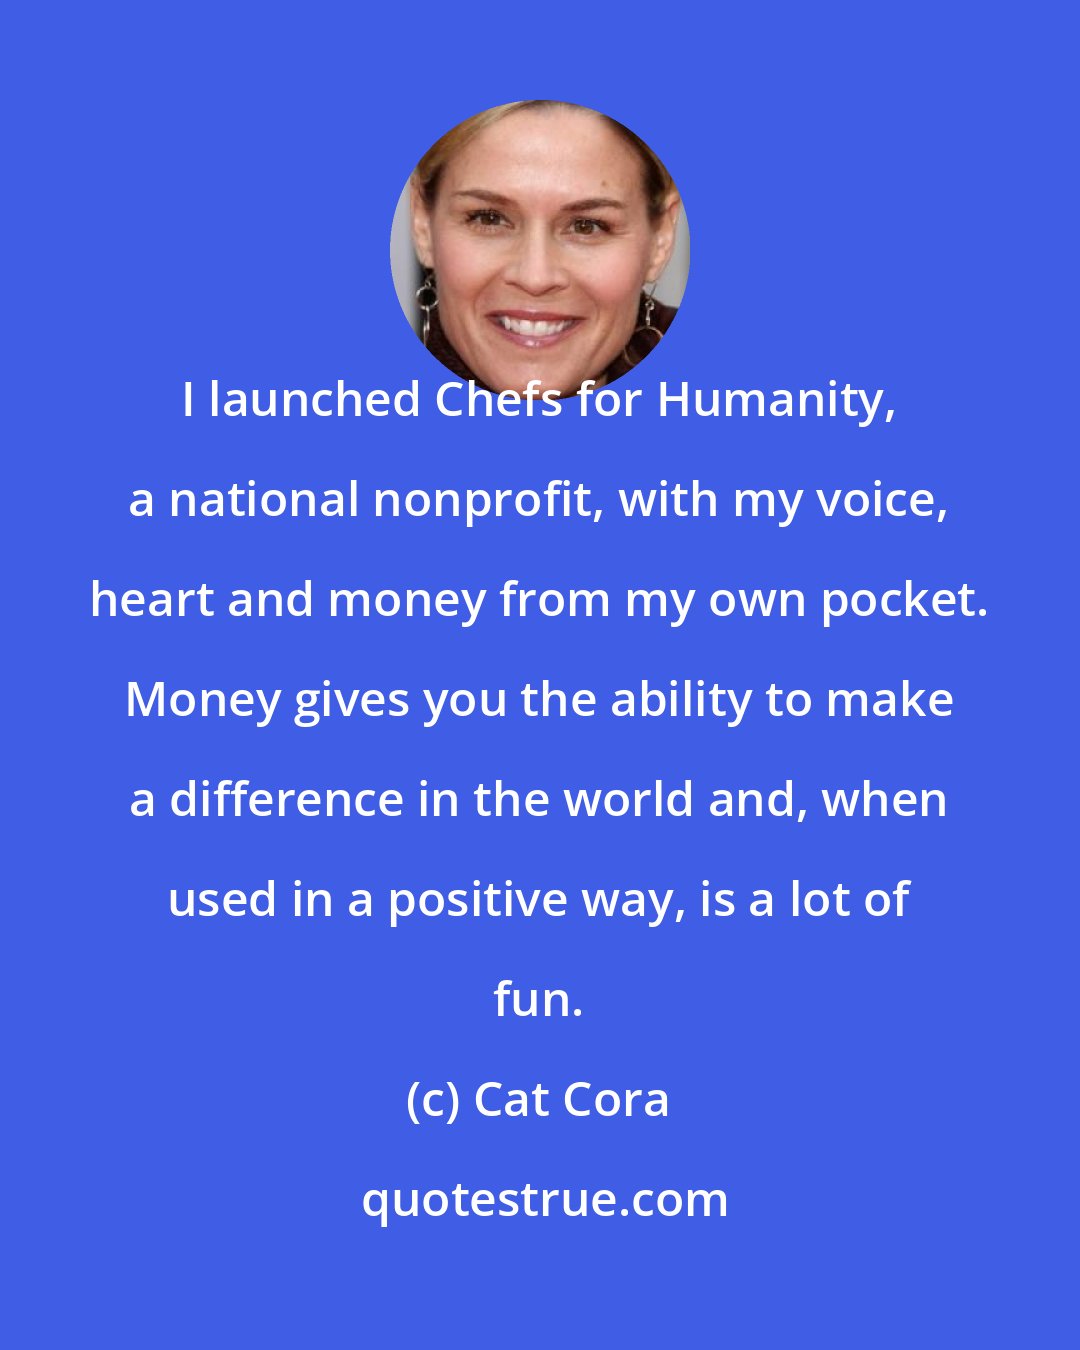 Cat Cora: I launched Chefs for Humanity, a national nonprofit, with my voice, heart and money from my own pocket. Money gives you the ability to make a difference in the world and, when used in a positive way, is a lot of fun.